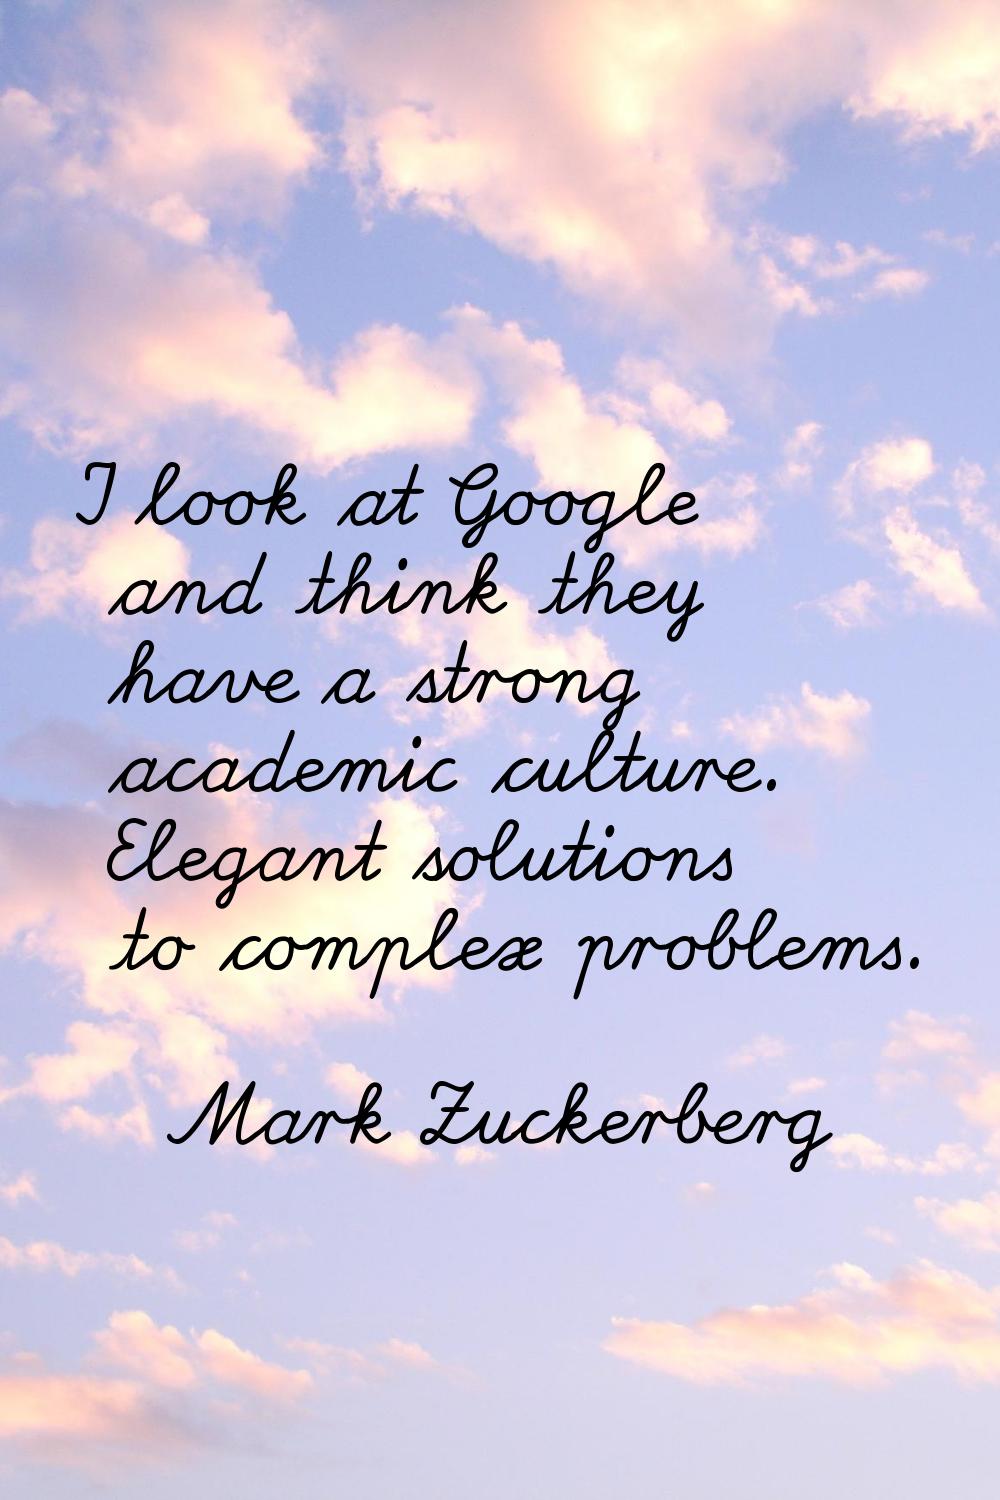 I look at Google and think they have a strong academic culture. Elegant solutions to complex proble